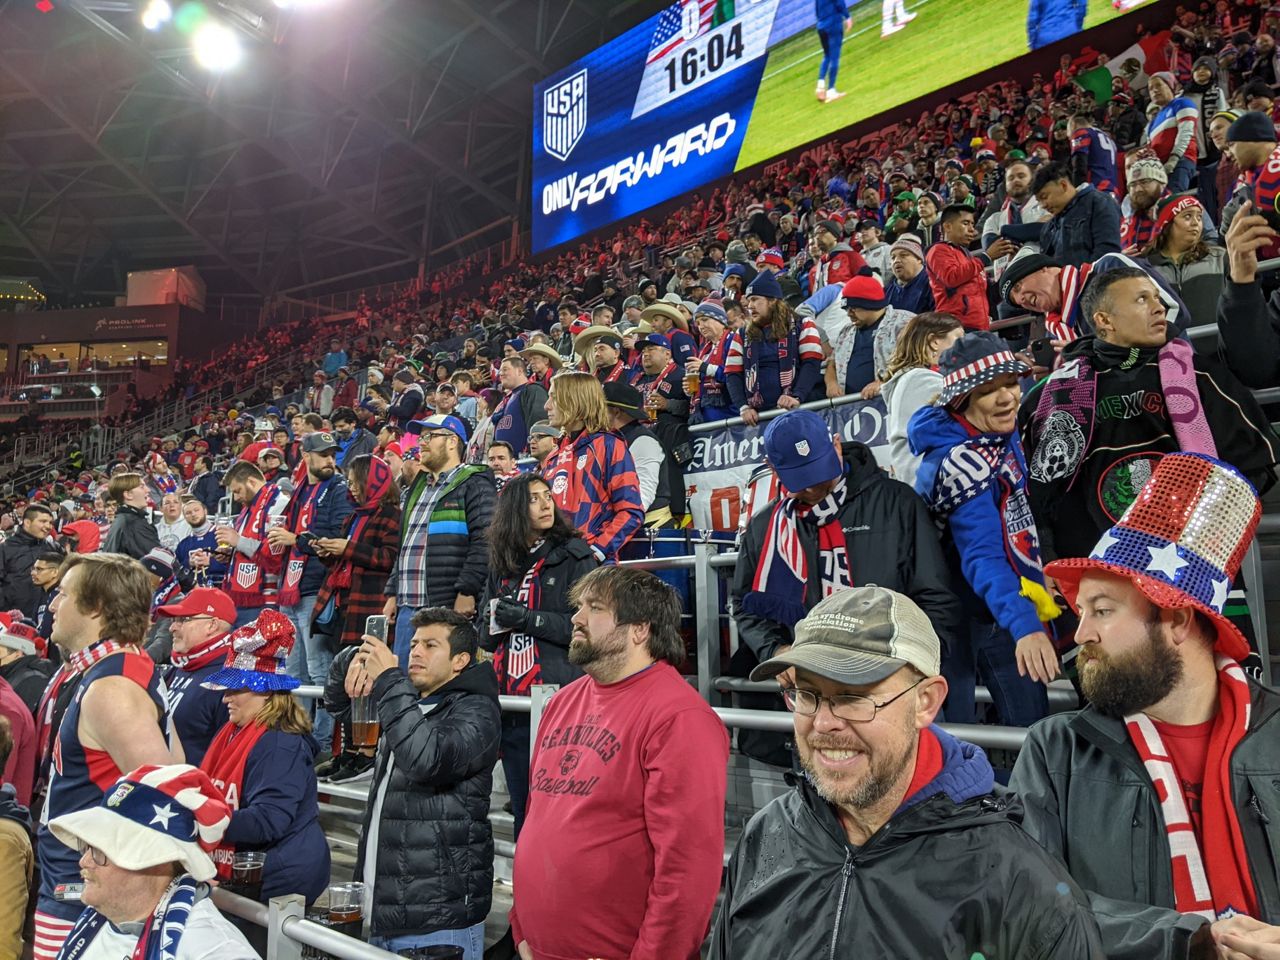 Fans inside the stadium for the USA/Mexico World Cup qualifier in Cincinnati, Ohio on Nov. 12, 2021 (Todd Smith/American Outlaws)